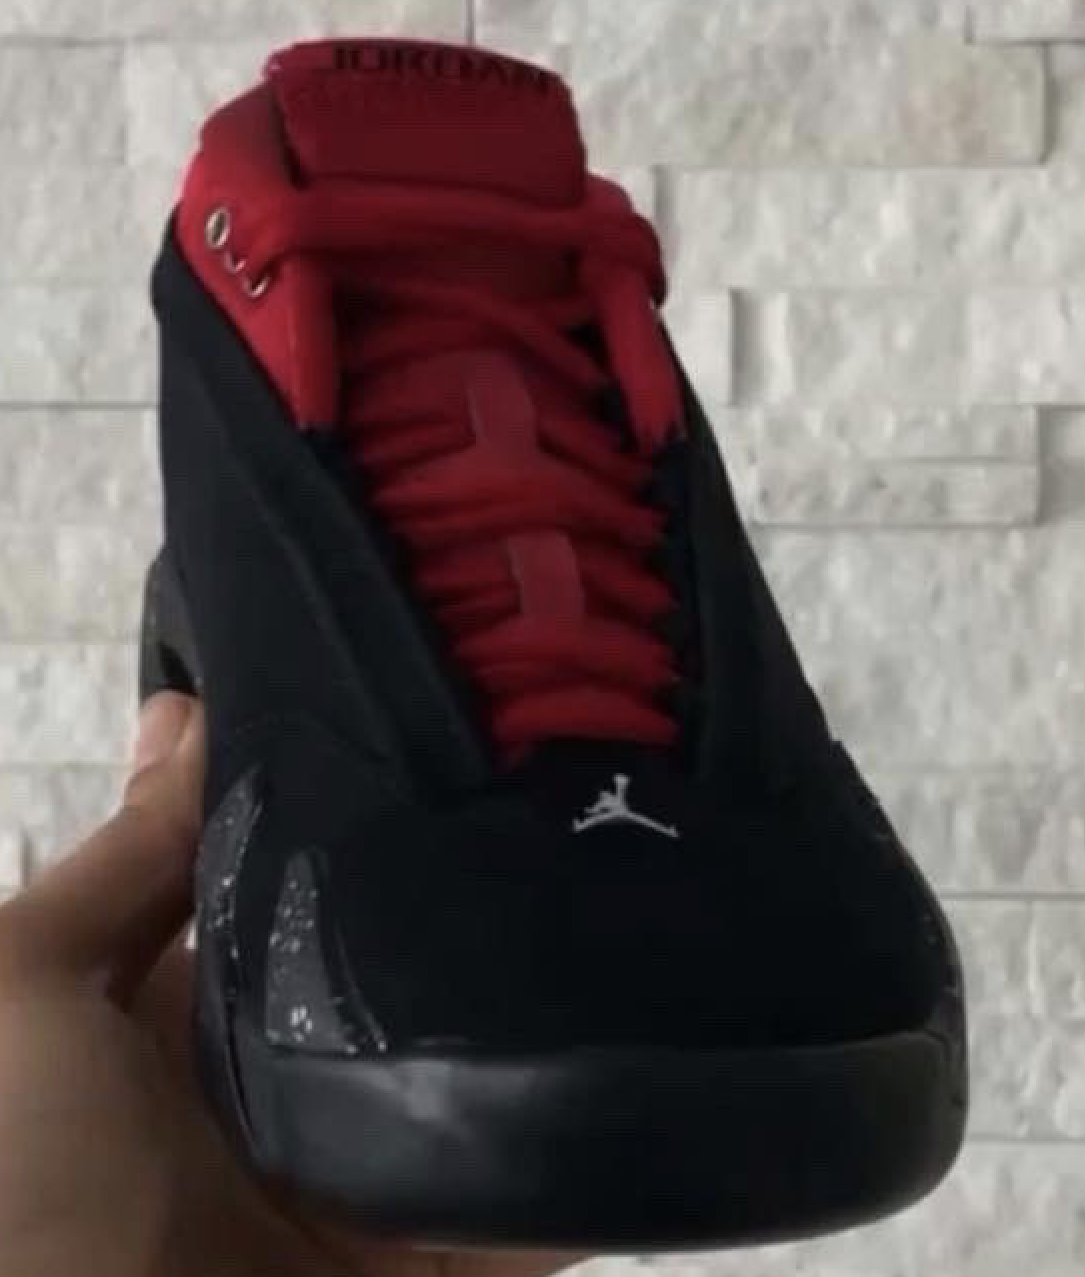 Air Jordan 14 Low Bred Gym Red WMNS DH4121-006 Release Date